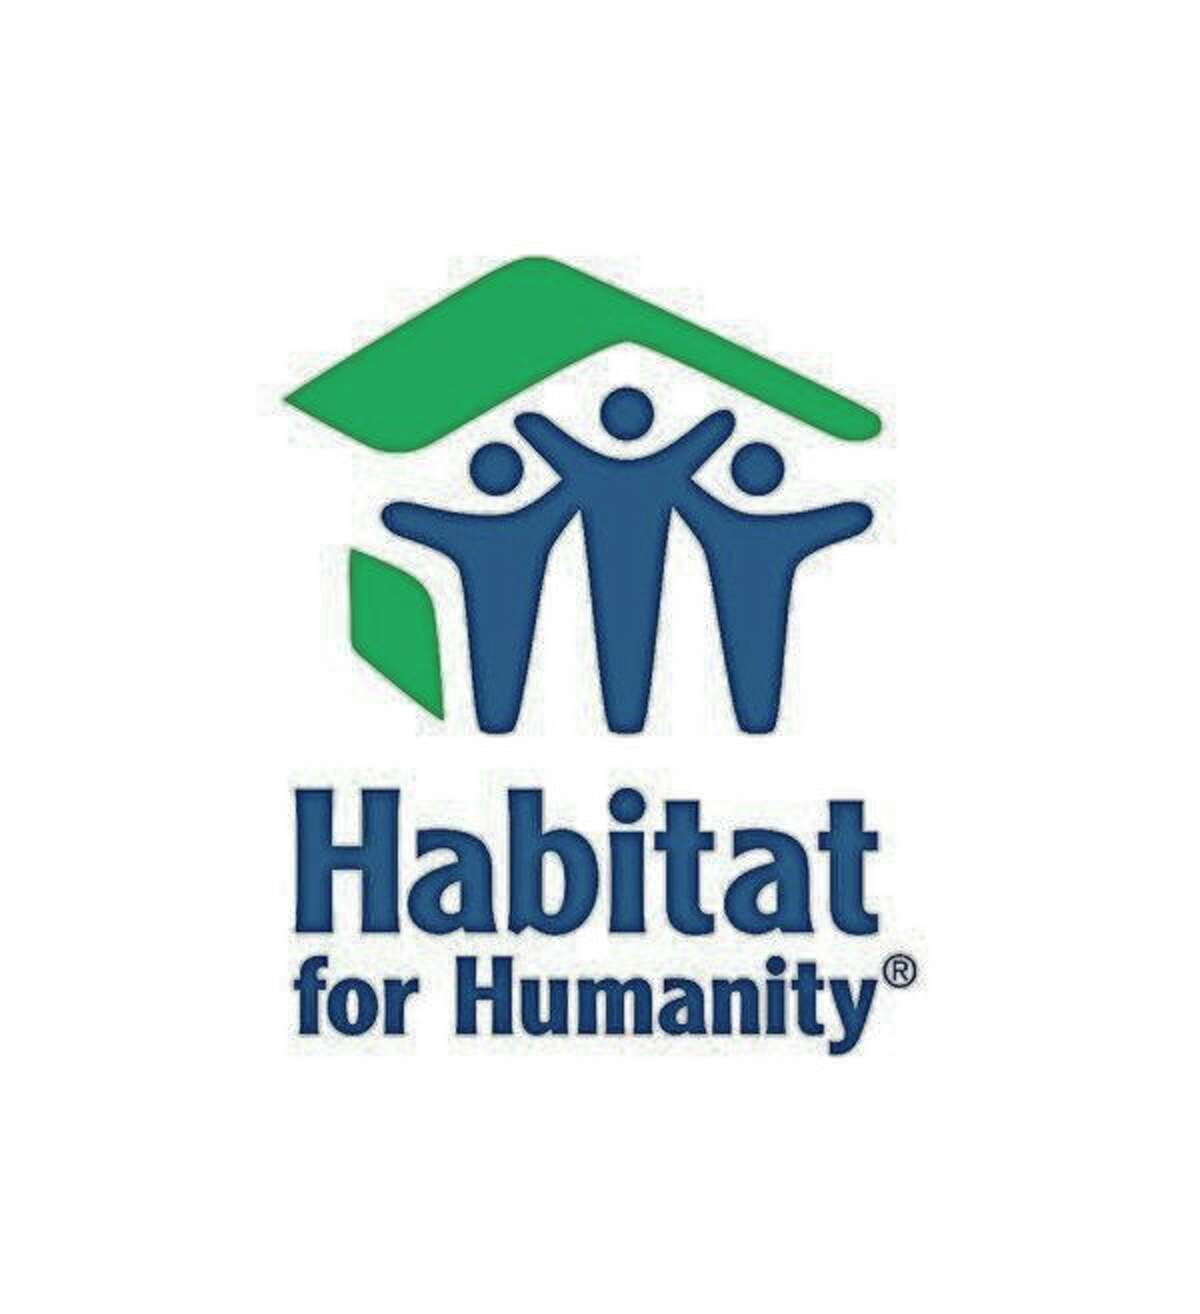 Manistee County Habitat for Humanity received a grant from the Manistee County Community Foundation for the Tools for Shelter program.